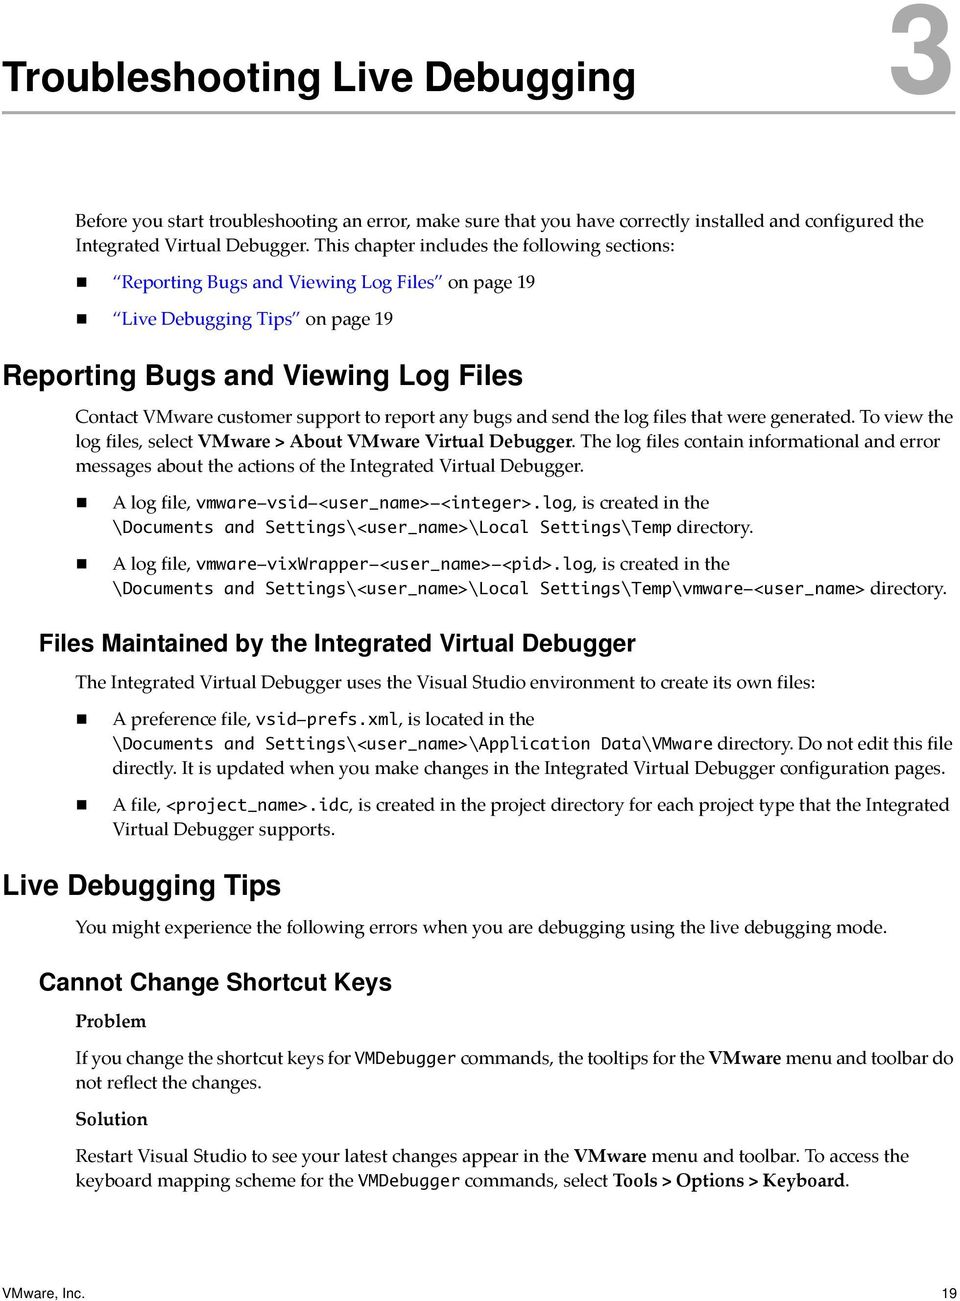 report any bugs and send the log files that were generated. To view the log files, select VMware > About VMware Virtual Debugger.